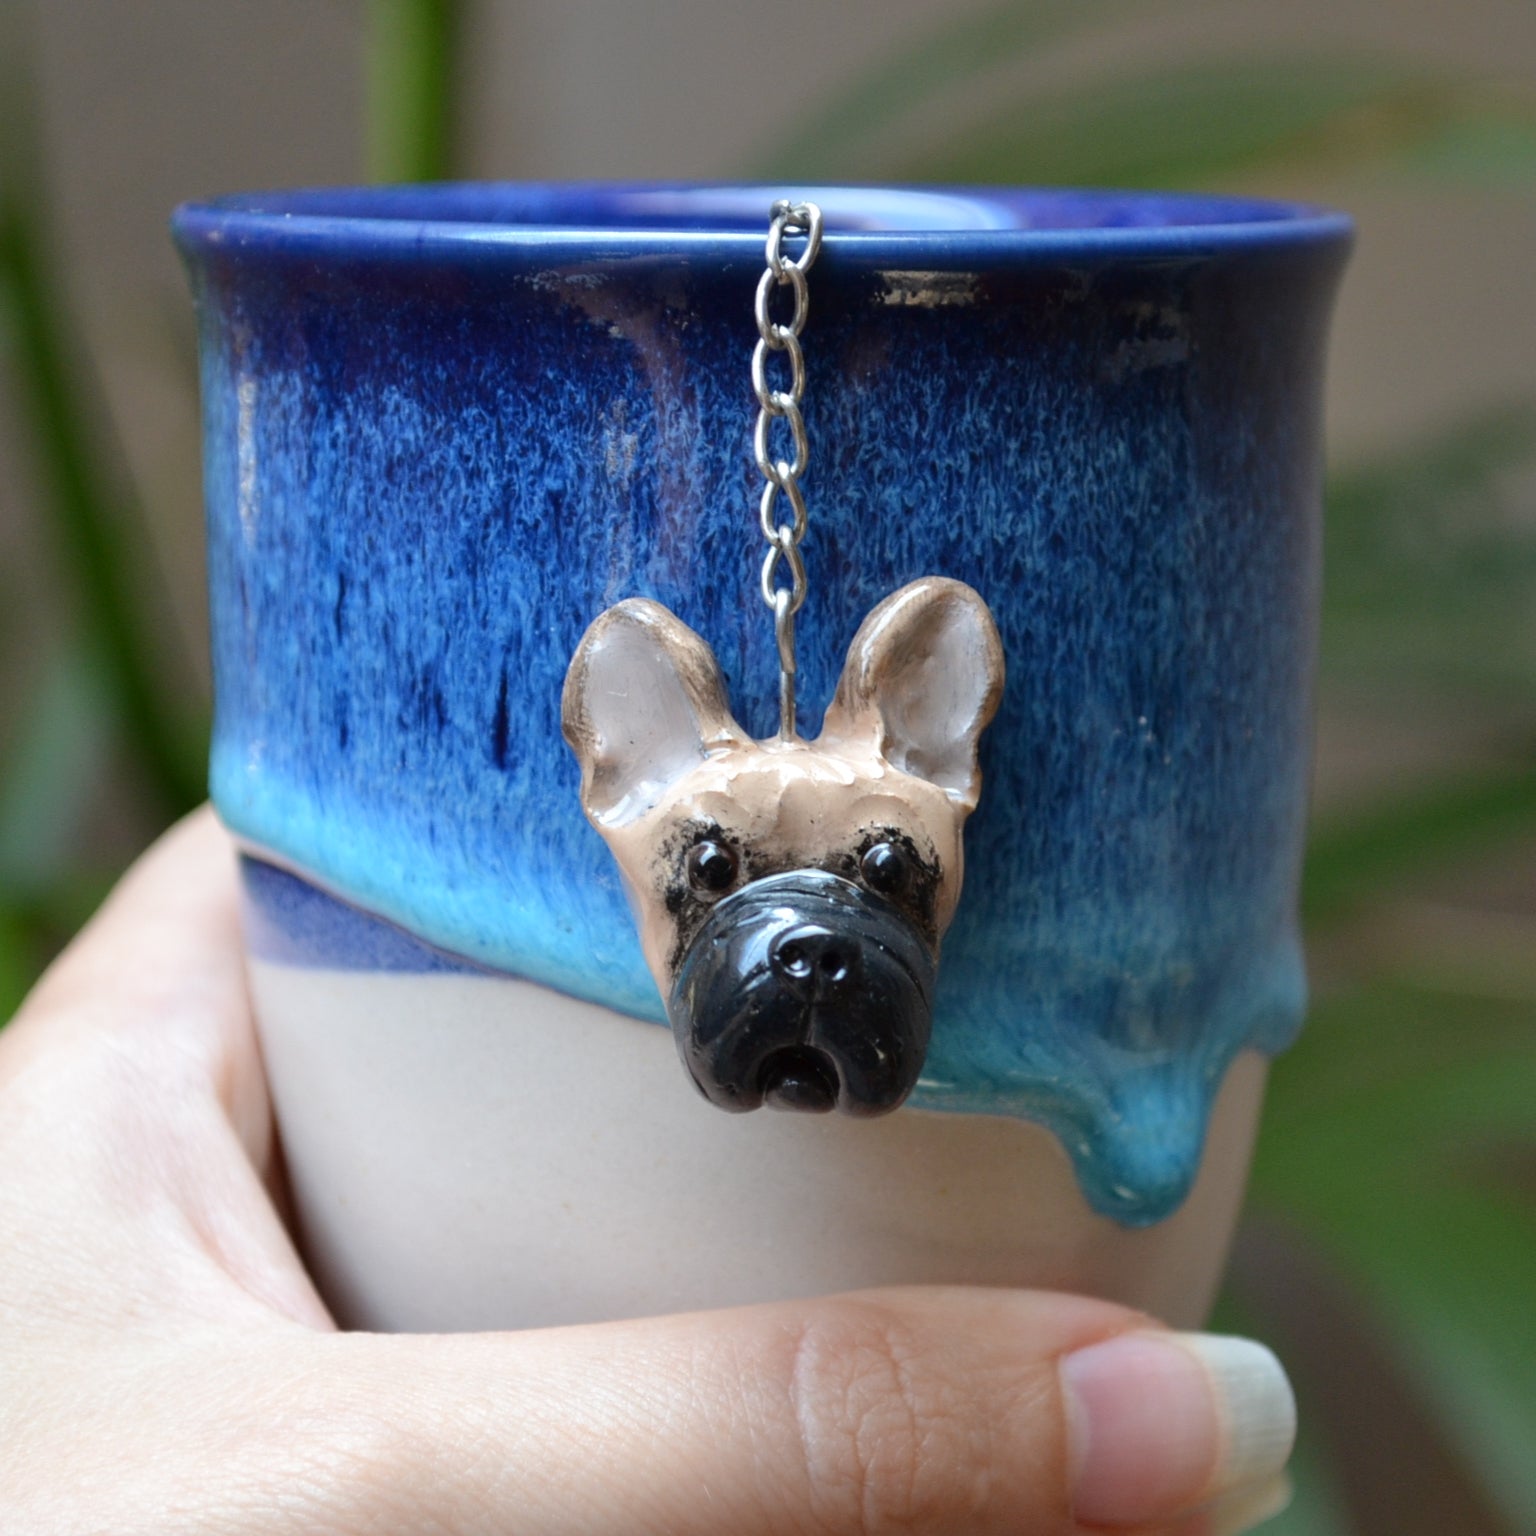 Handmade custom pet face mesh ball tea strainer being used in a blue ceramic cup..